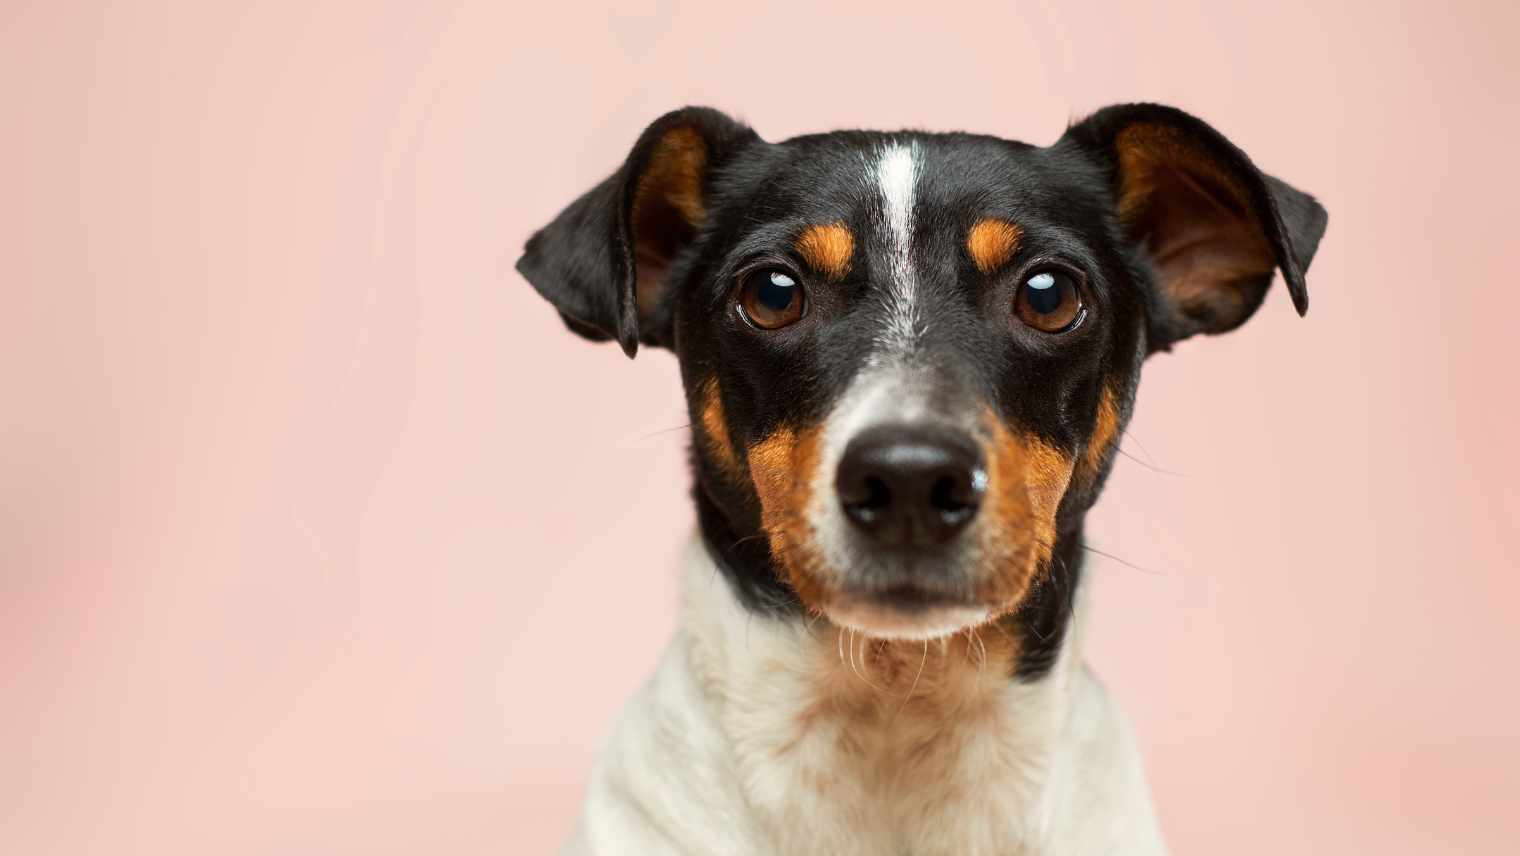 Image of a puppy in front of a pink background